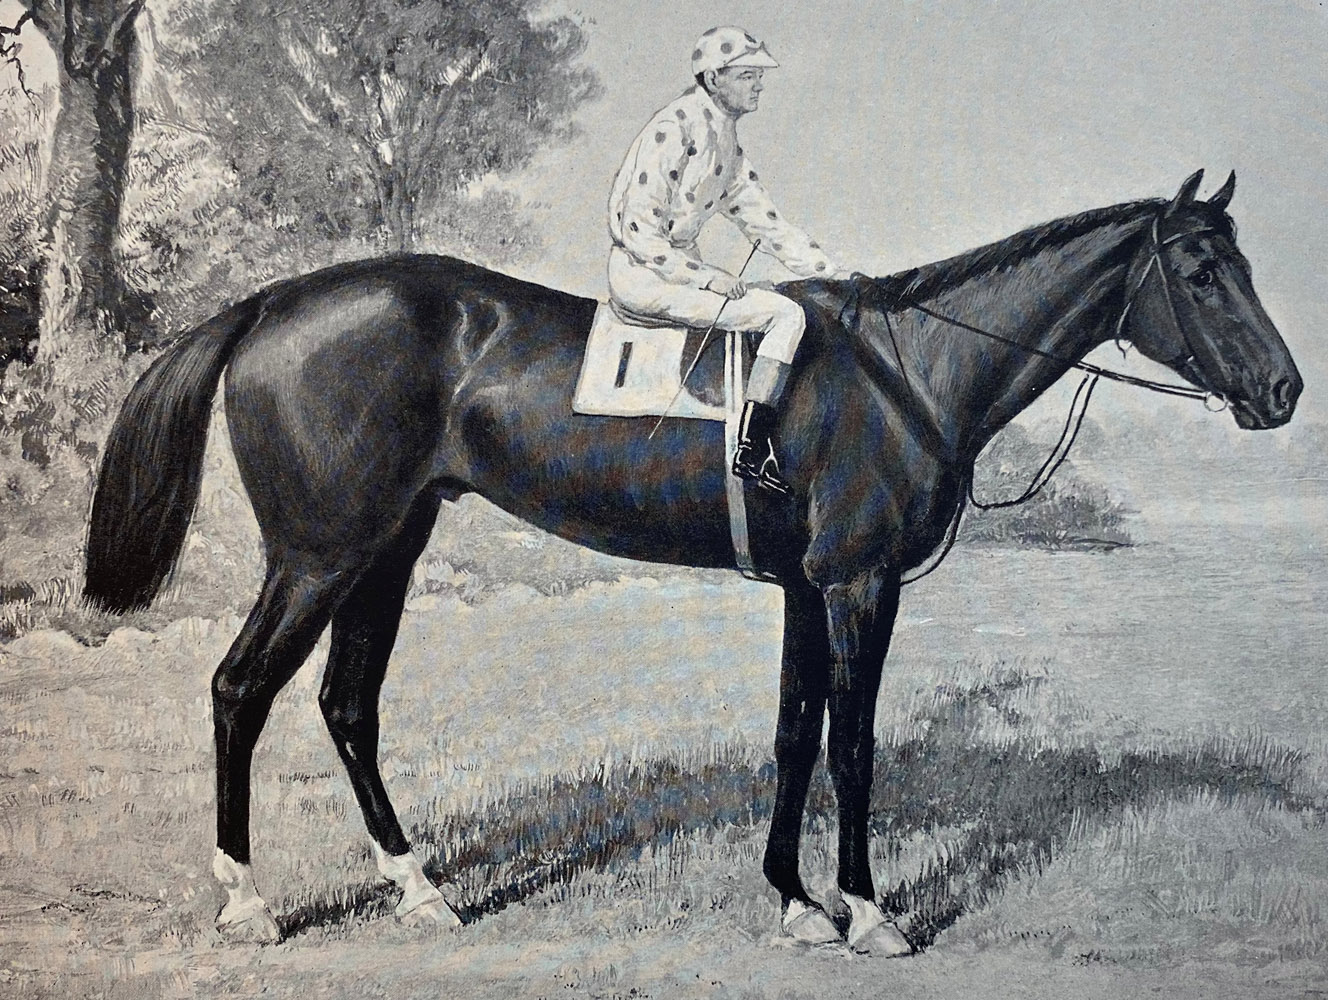 Illustration of Commando from "Racing in America, 1866-1921" (Museum Collection)